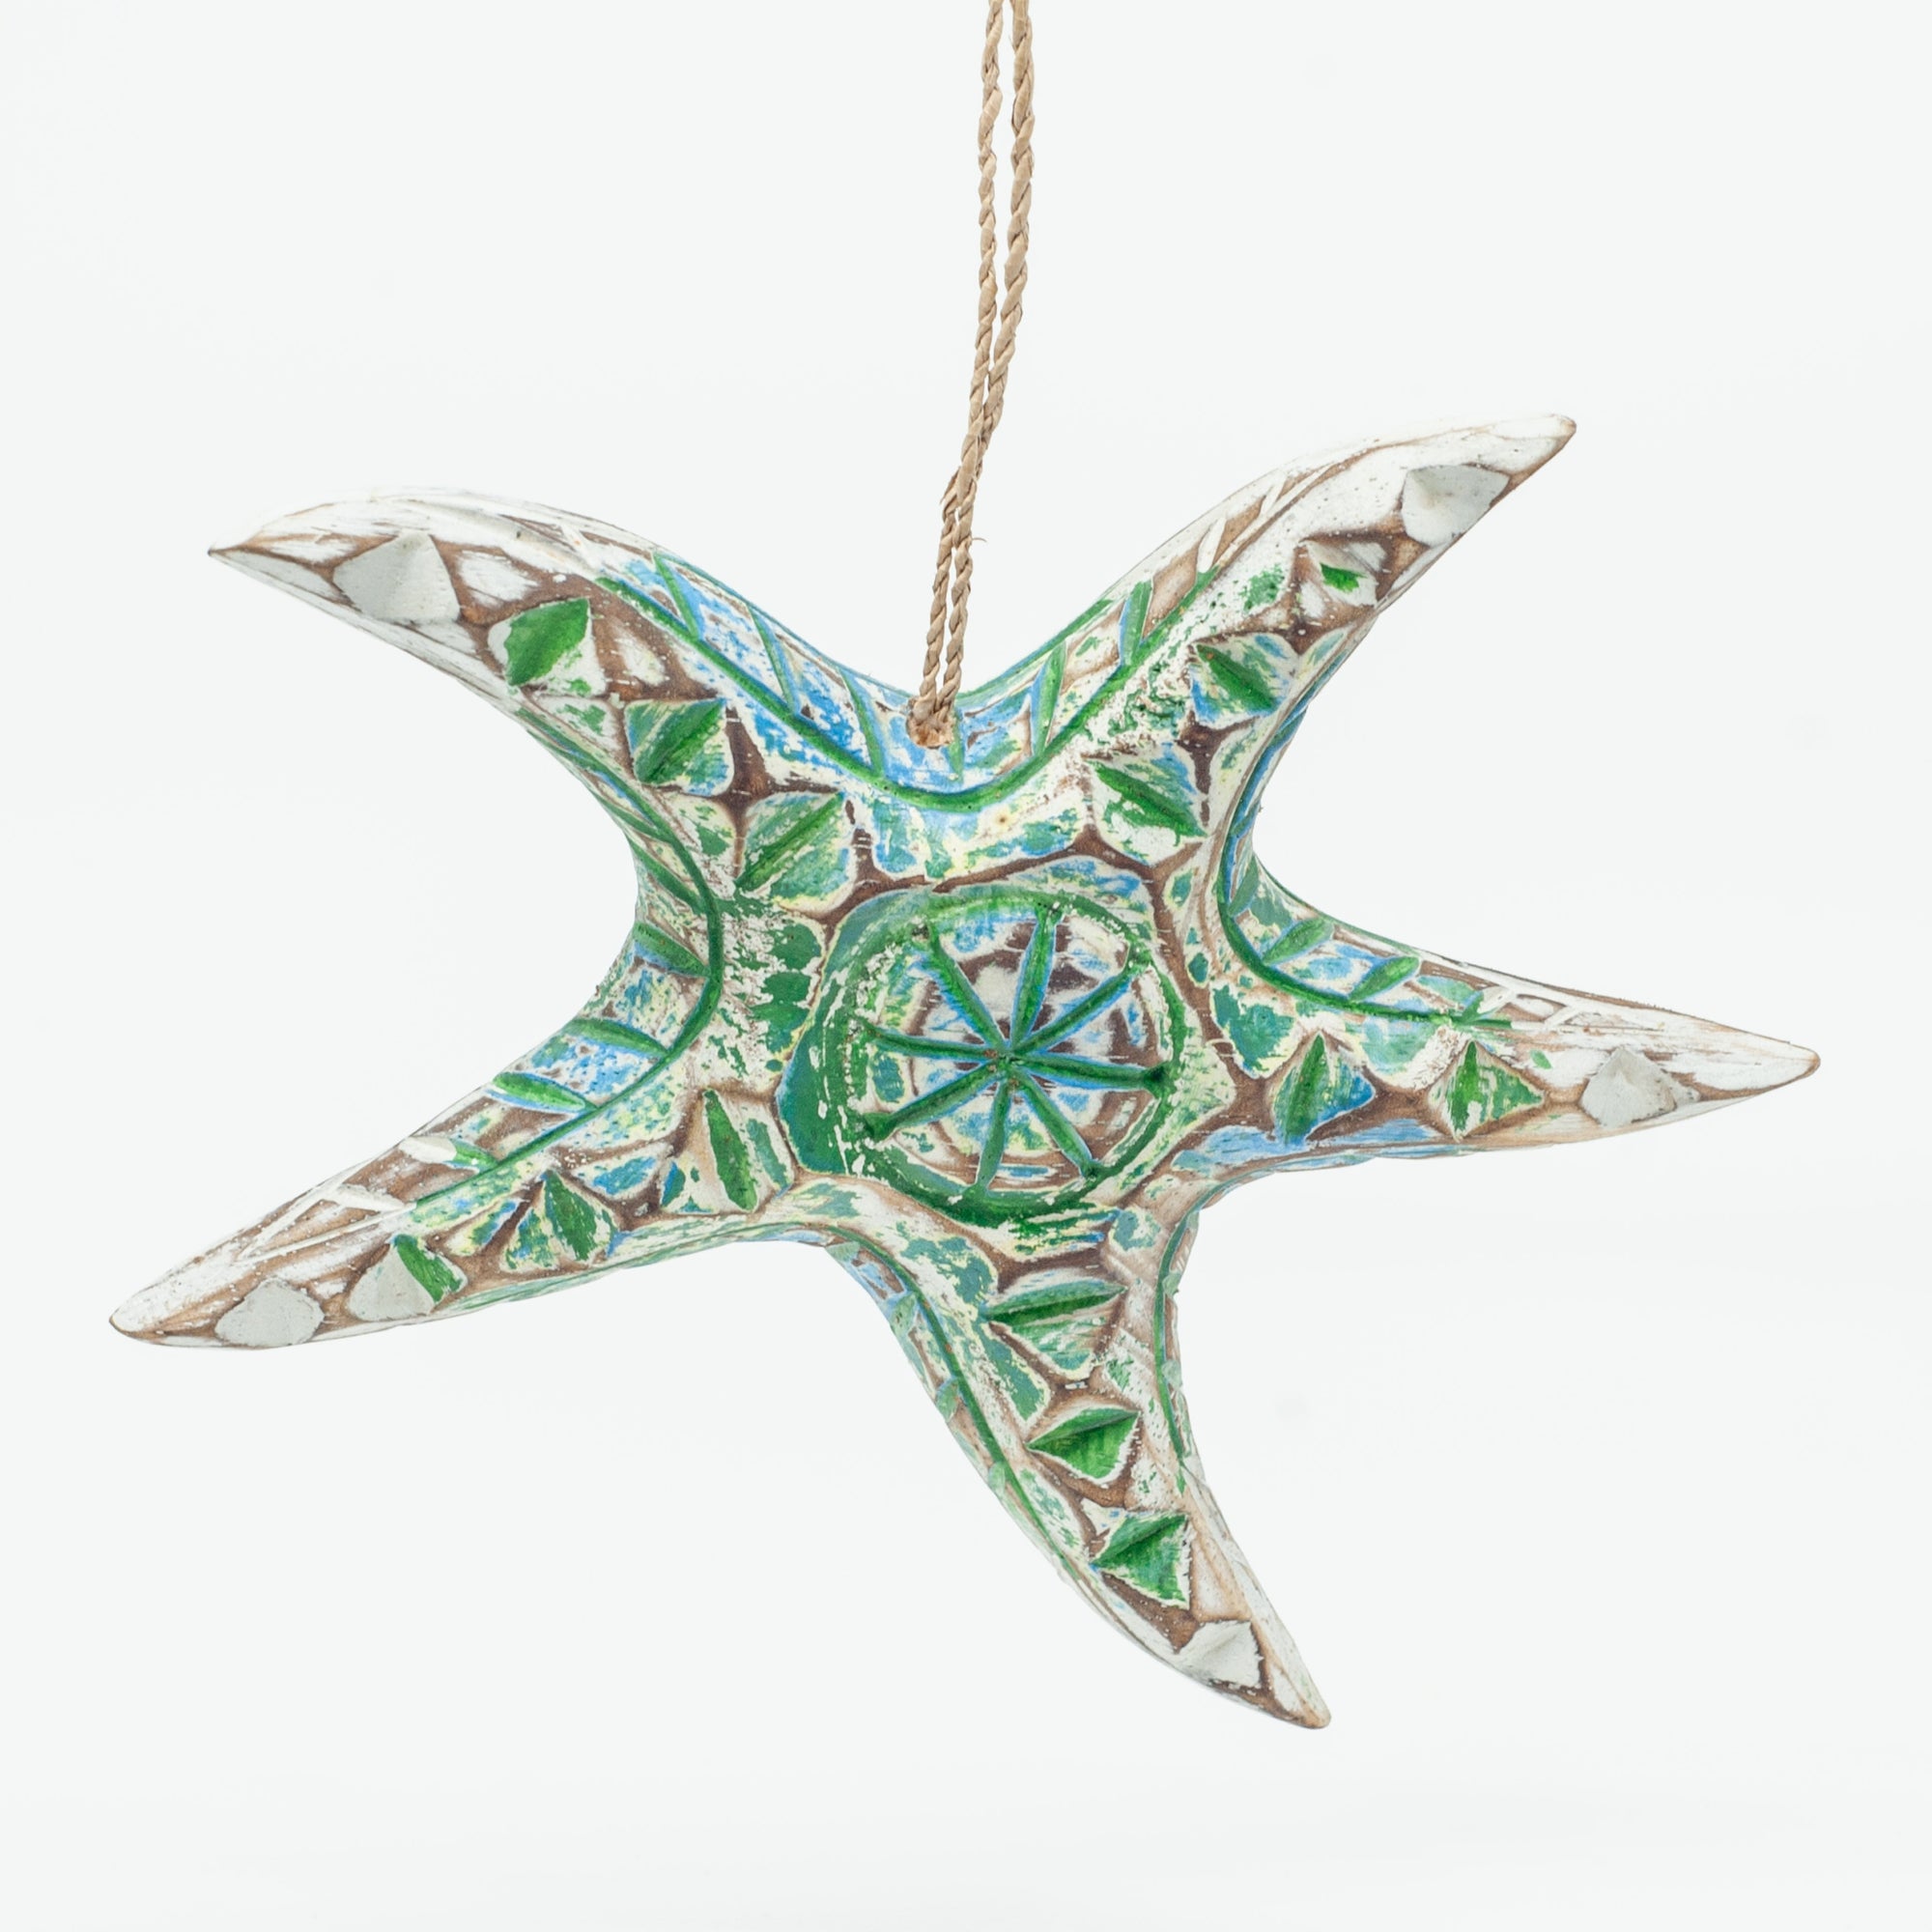 Small driftwood starfish ornament on white background hanging from string. 